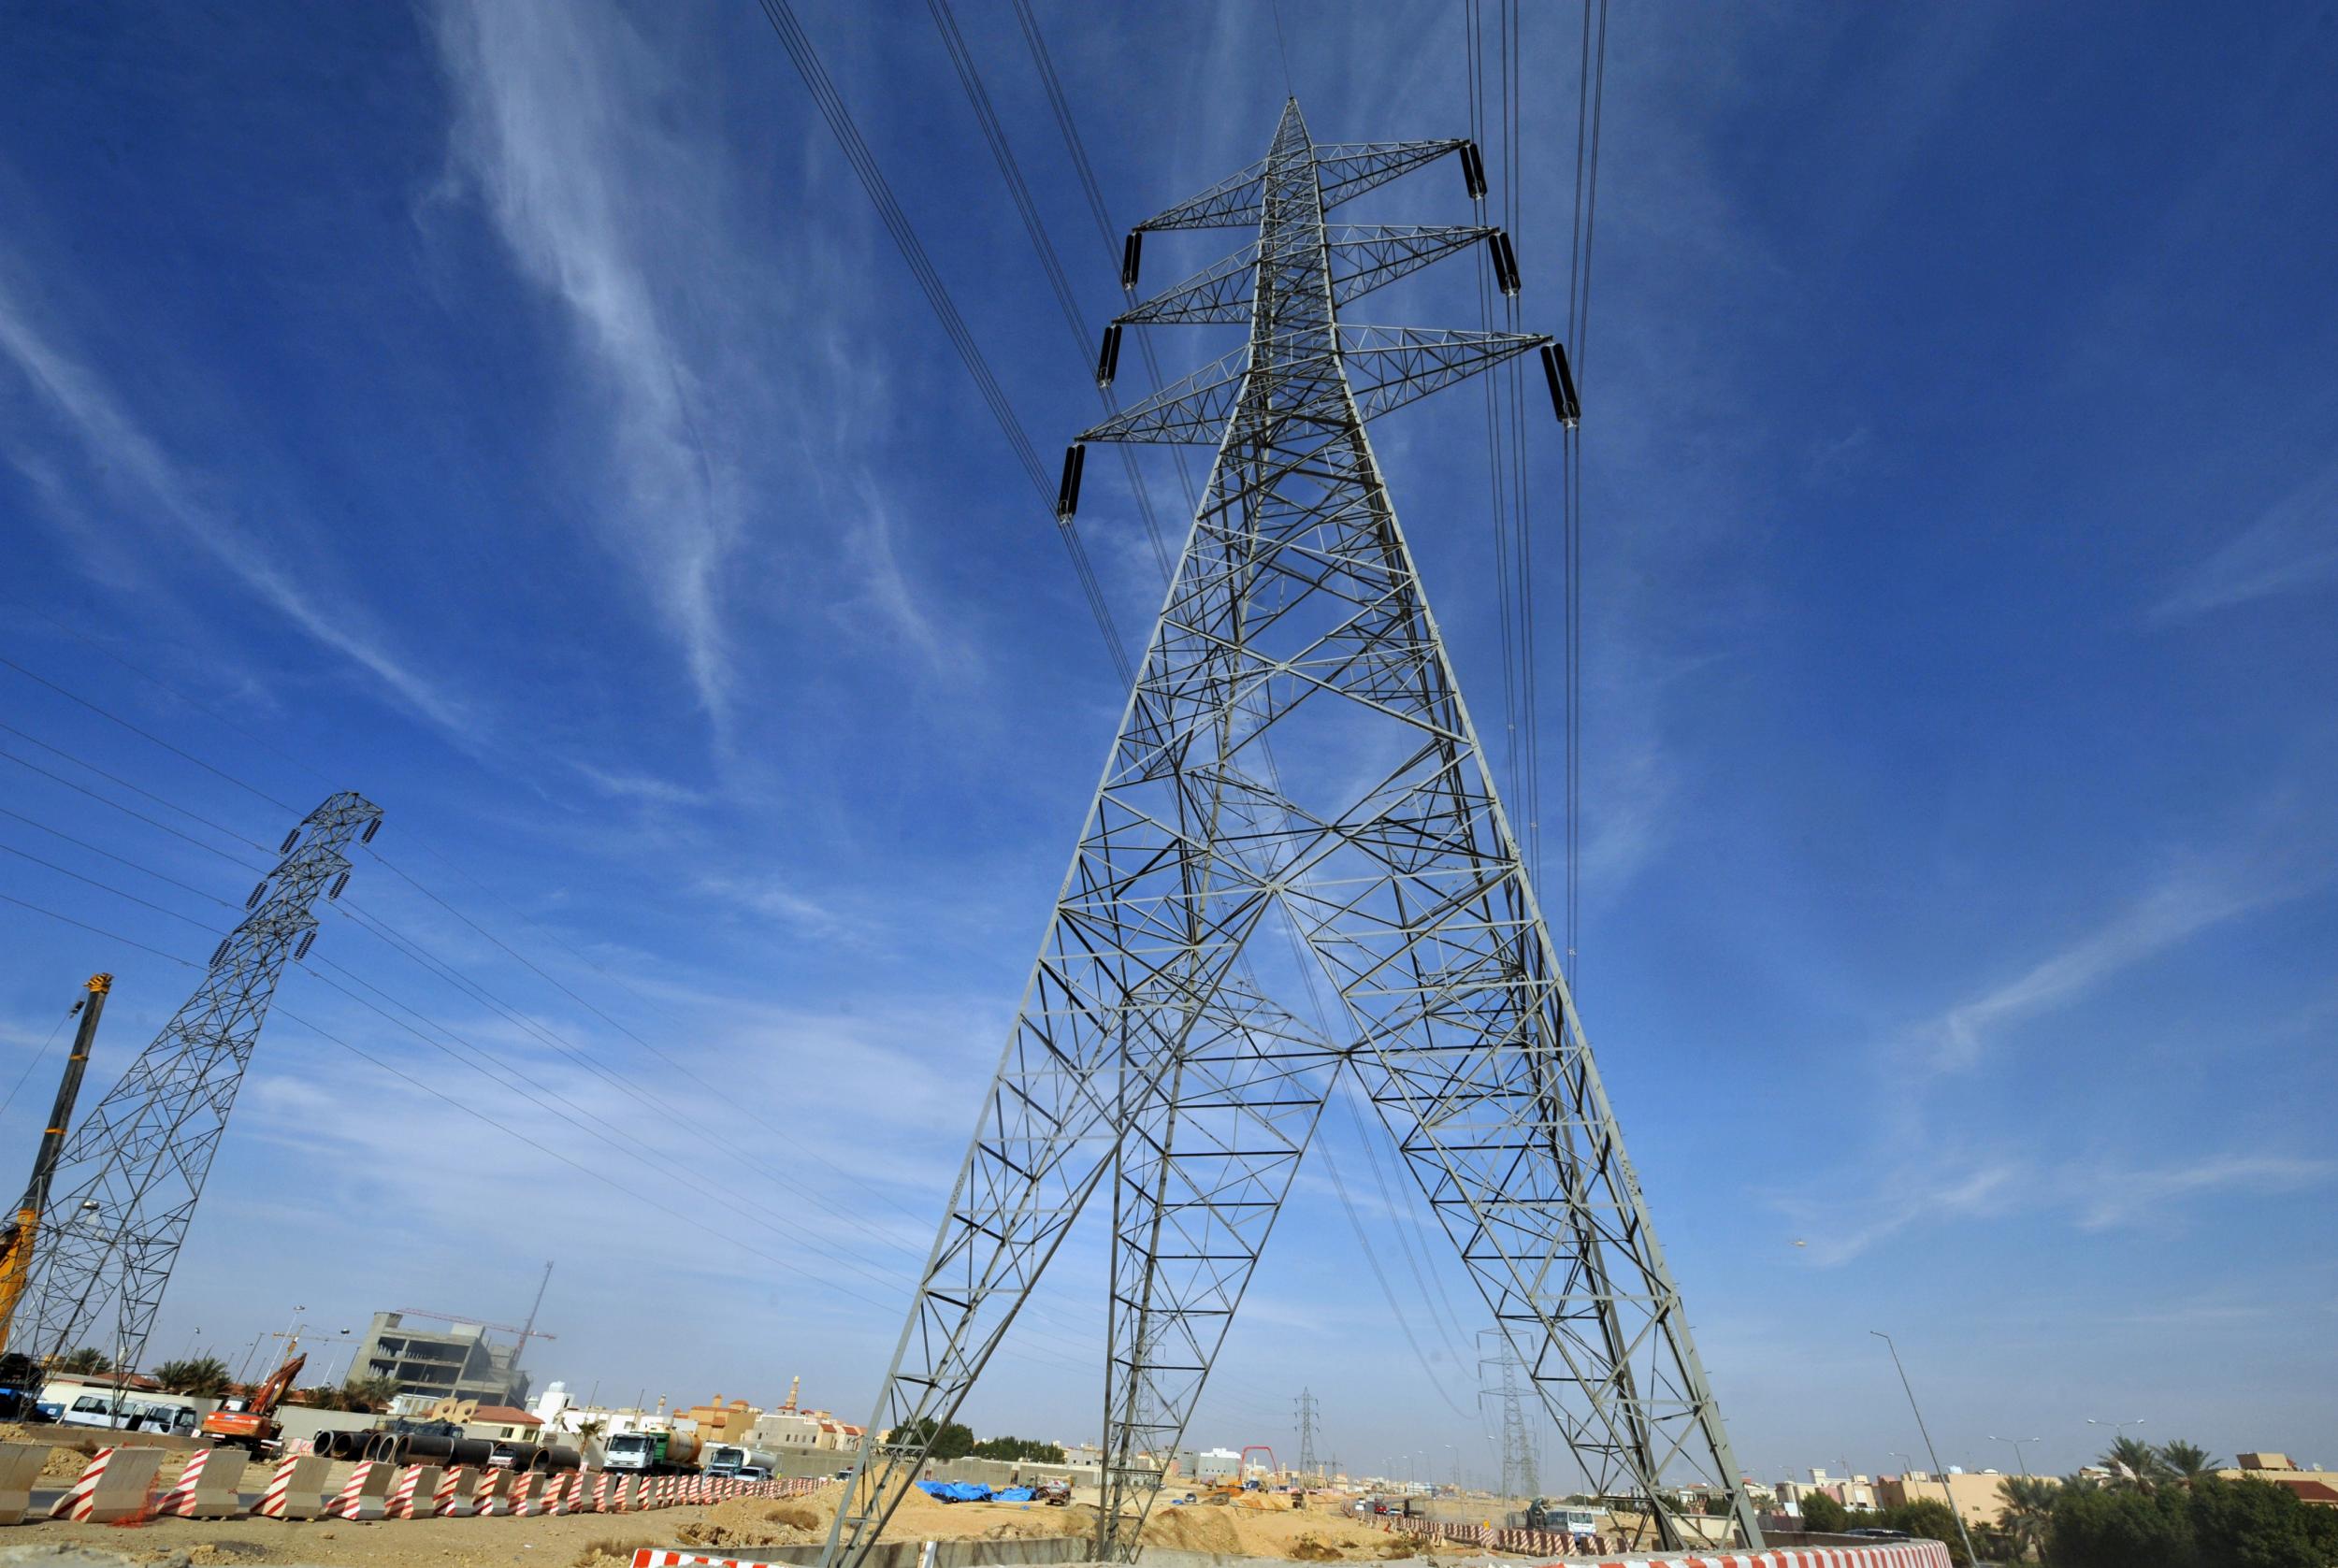 A picture taken on 4 December 2012, shows electricity pylons erected in the Saudi capital of Riyadh